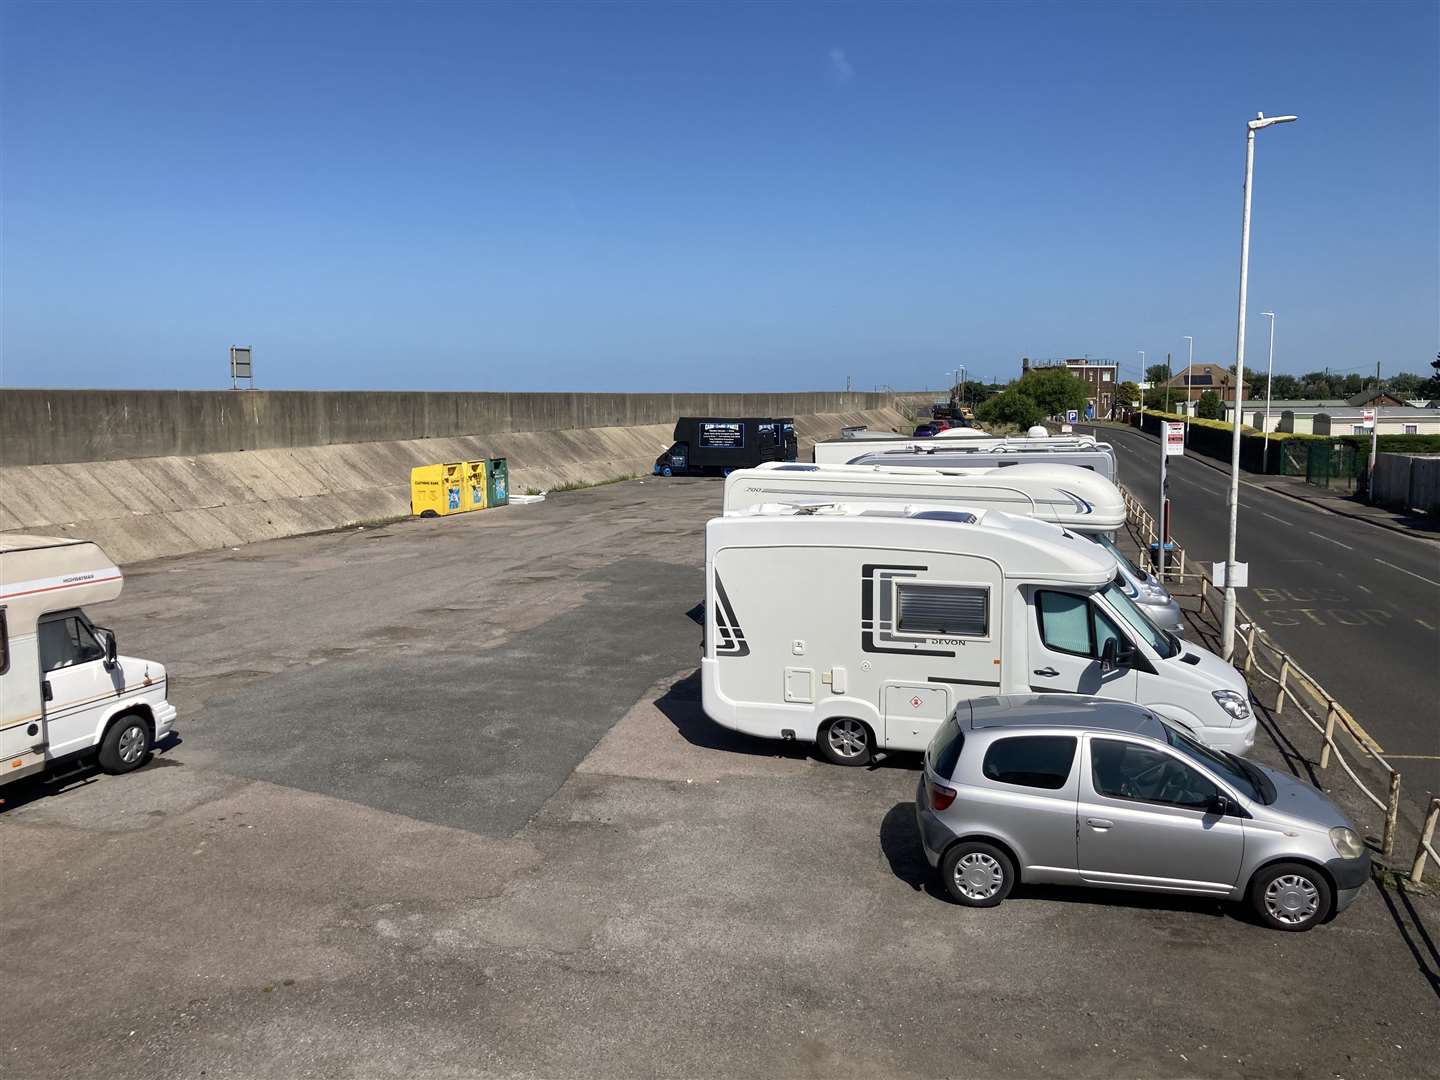 The Ship on Shore car park at Sheerness could be used for tourist coaches